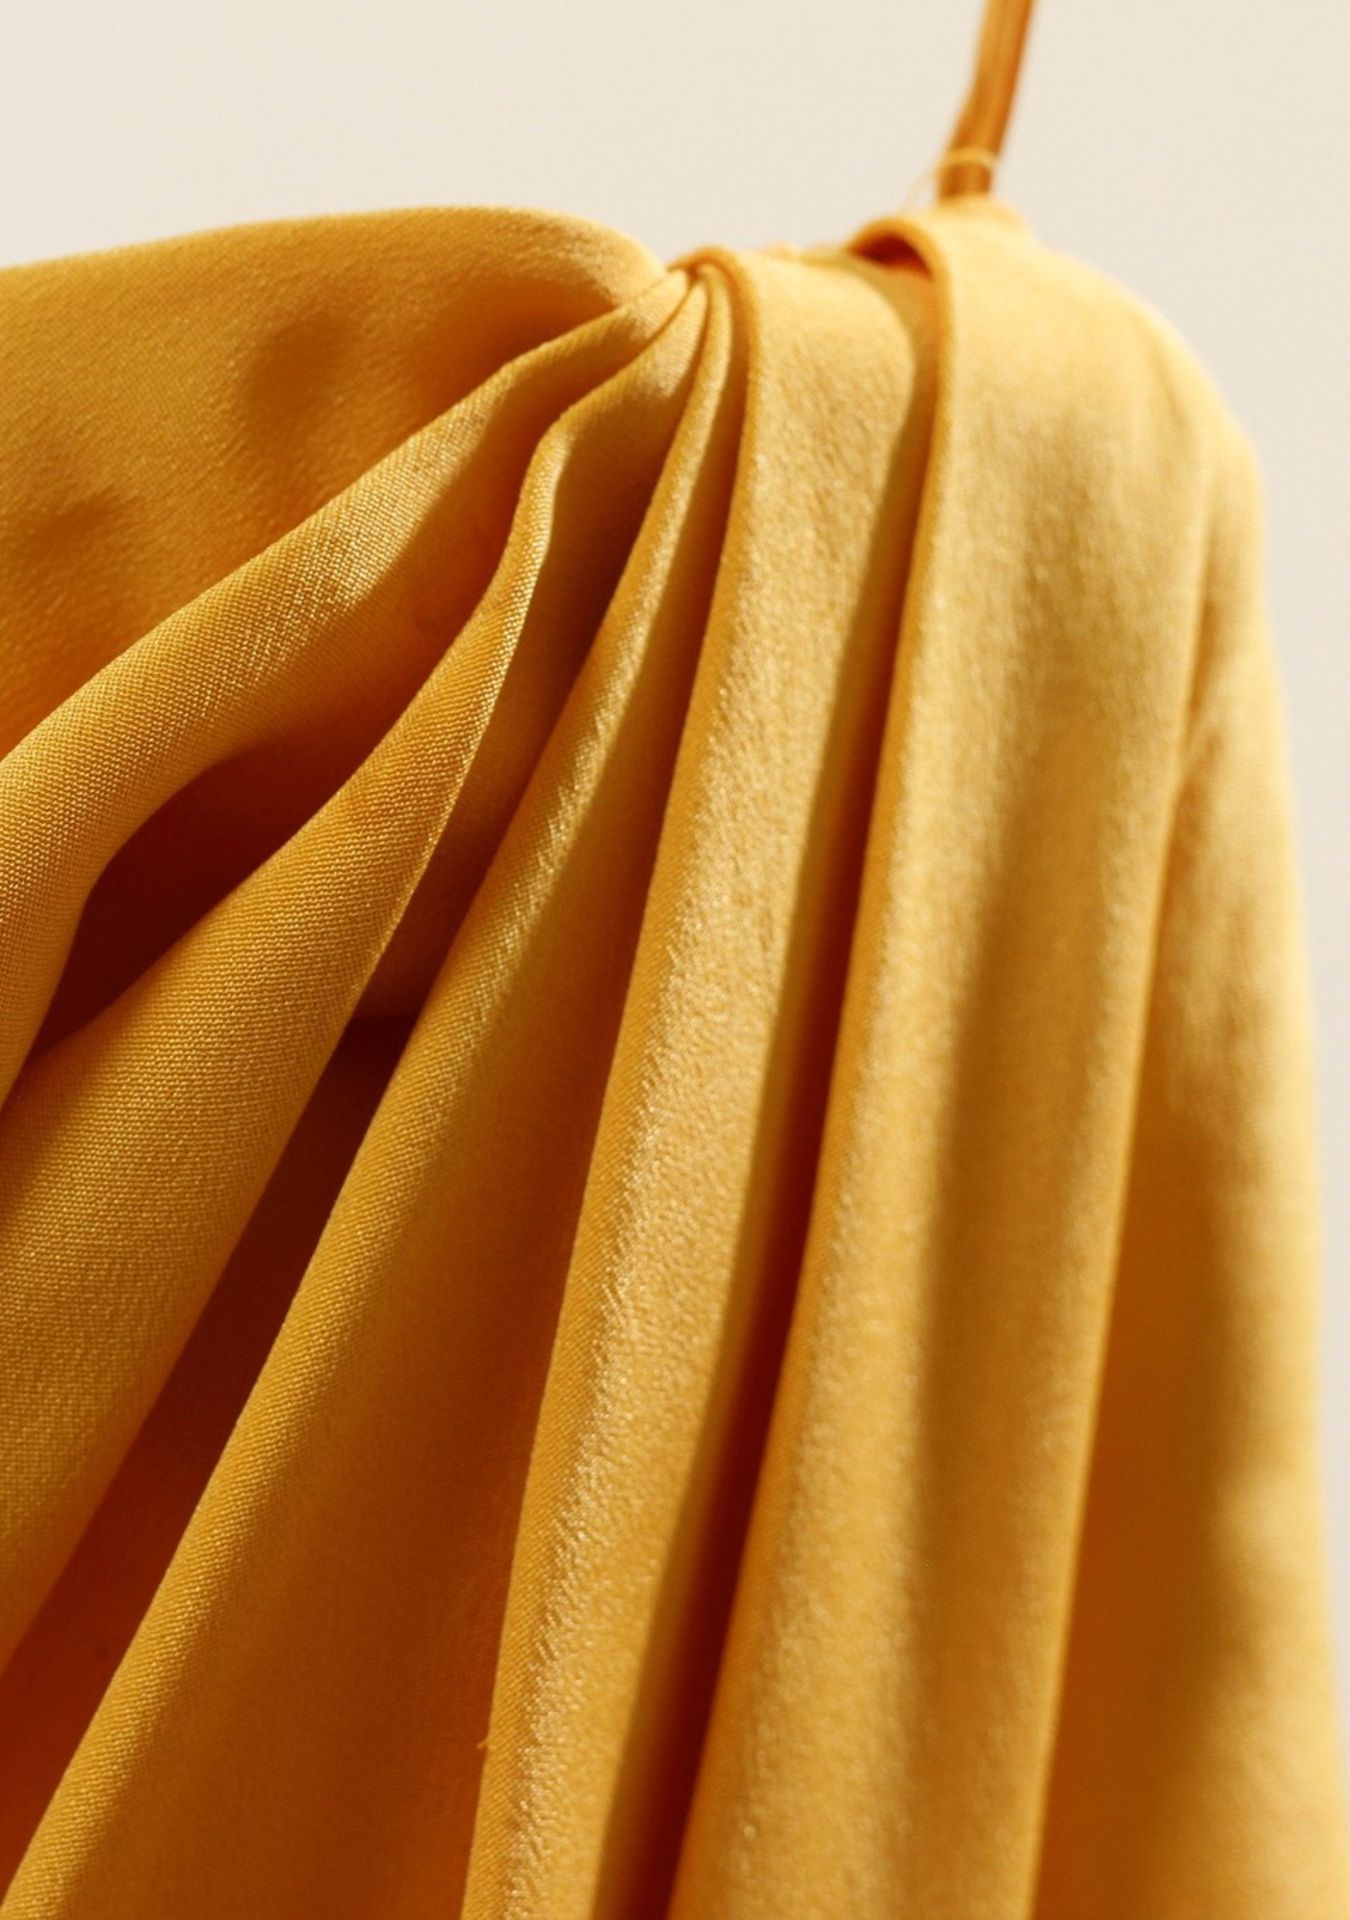 1 x Boutique Le Duc Yellow Dress - Size: 8 - Material: 100% Silk - From a High End Clothing Boutique - Image 4 of 7